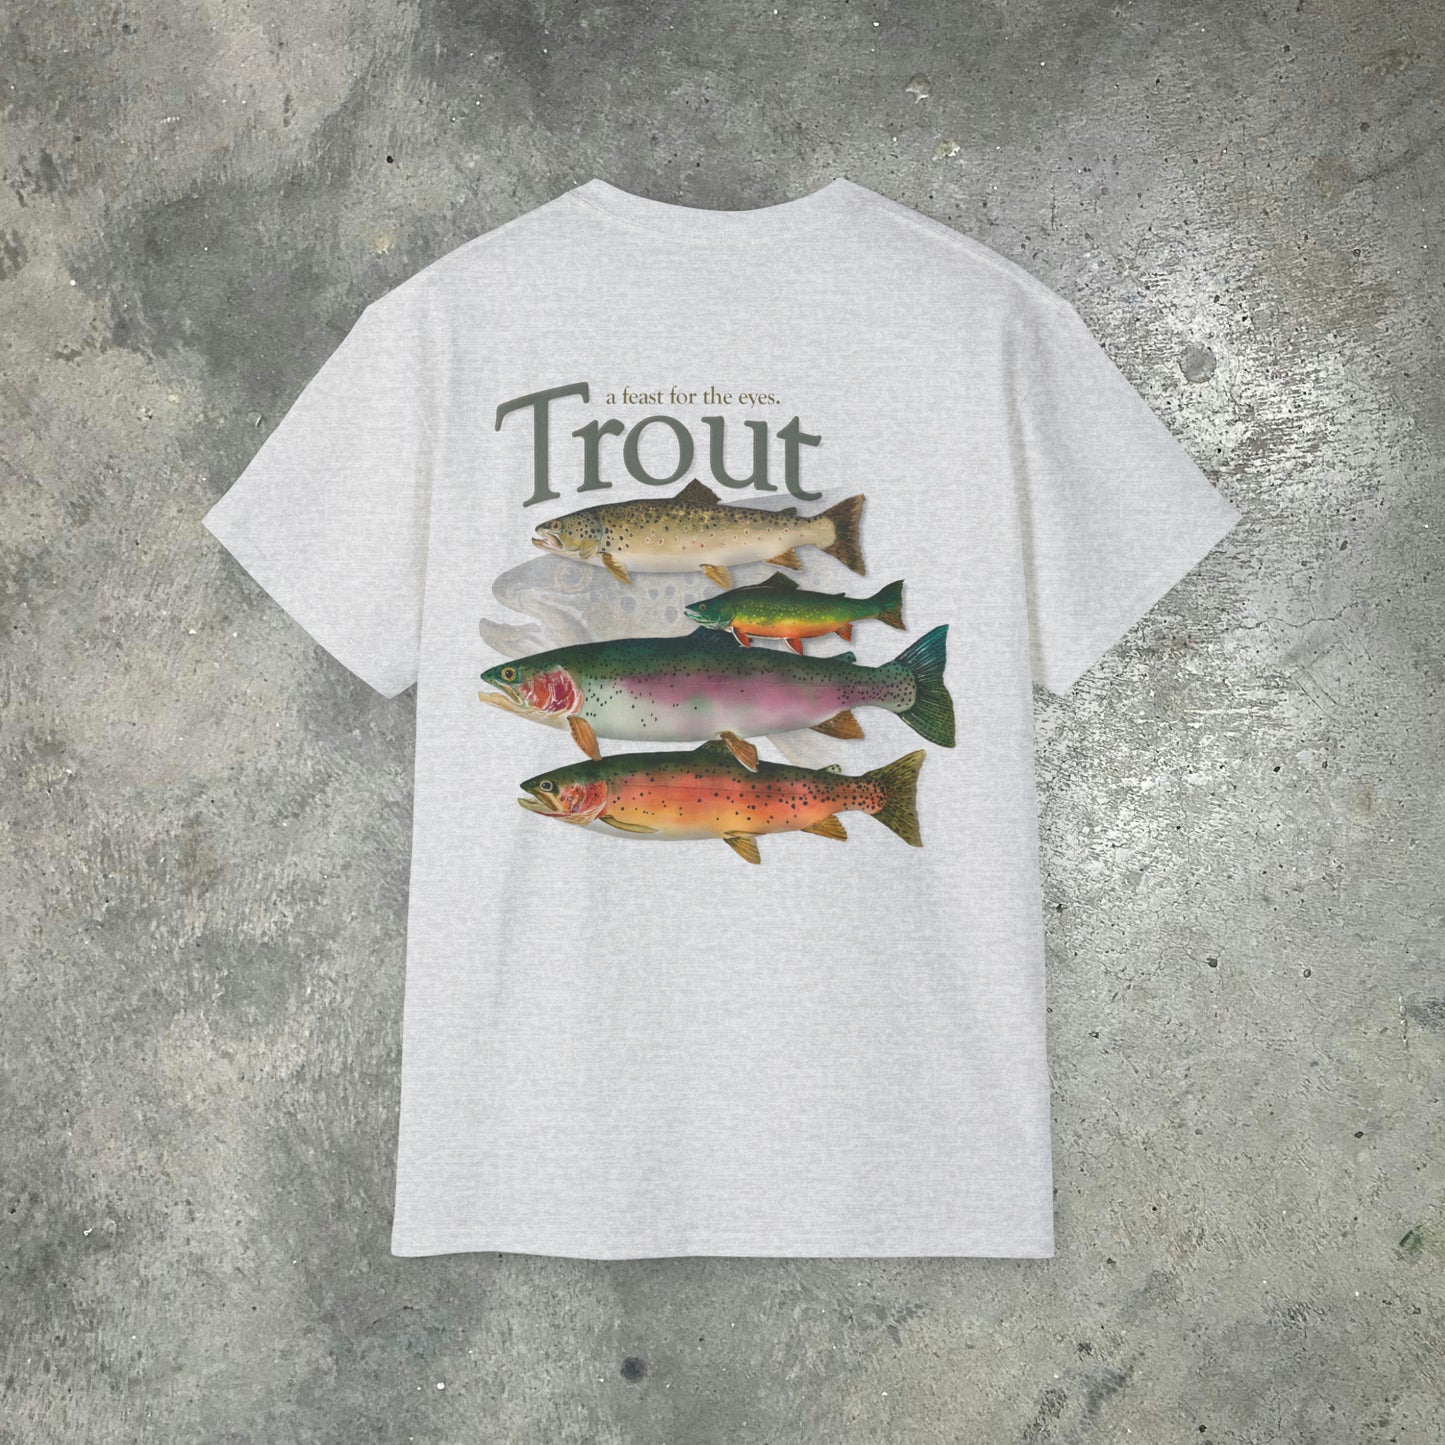 "Grand Slam of Trout" on an Ultra Cotton Tee